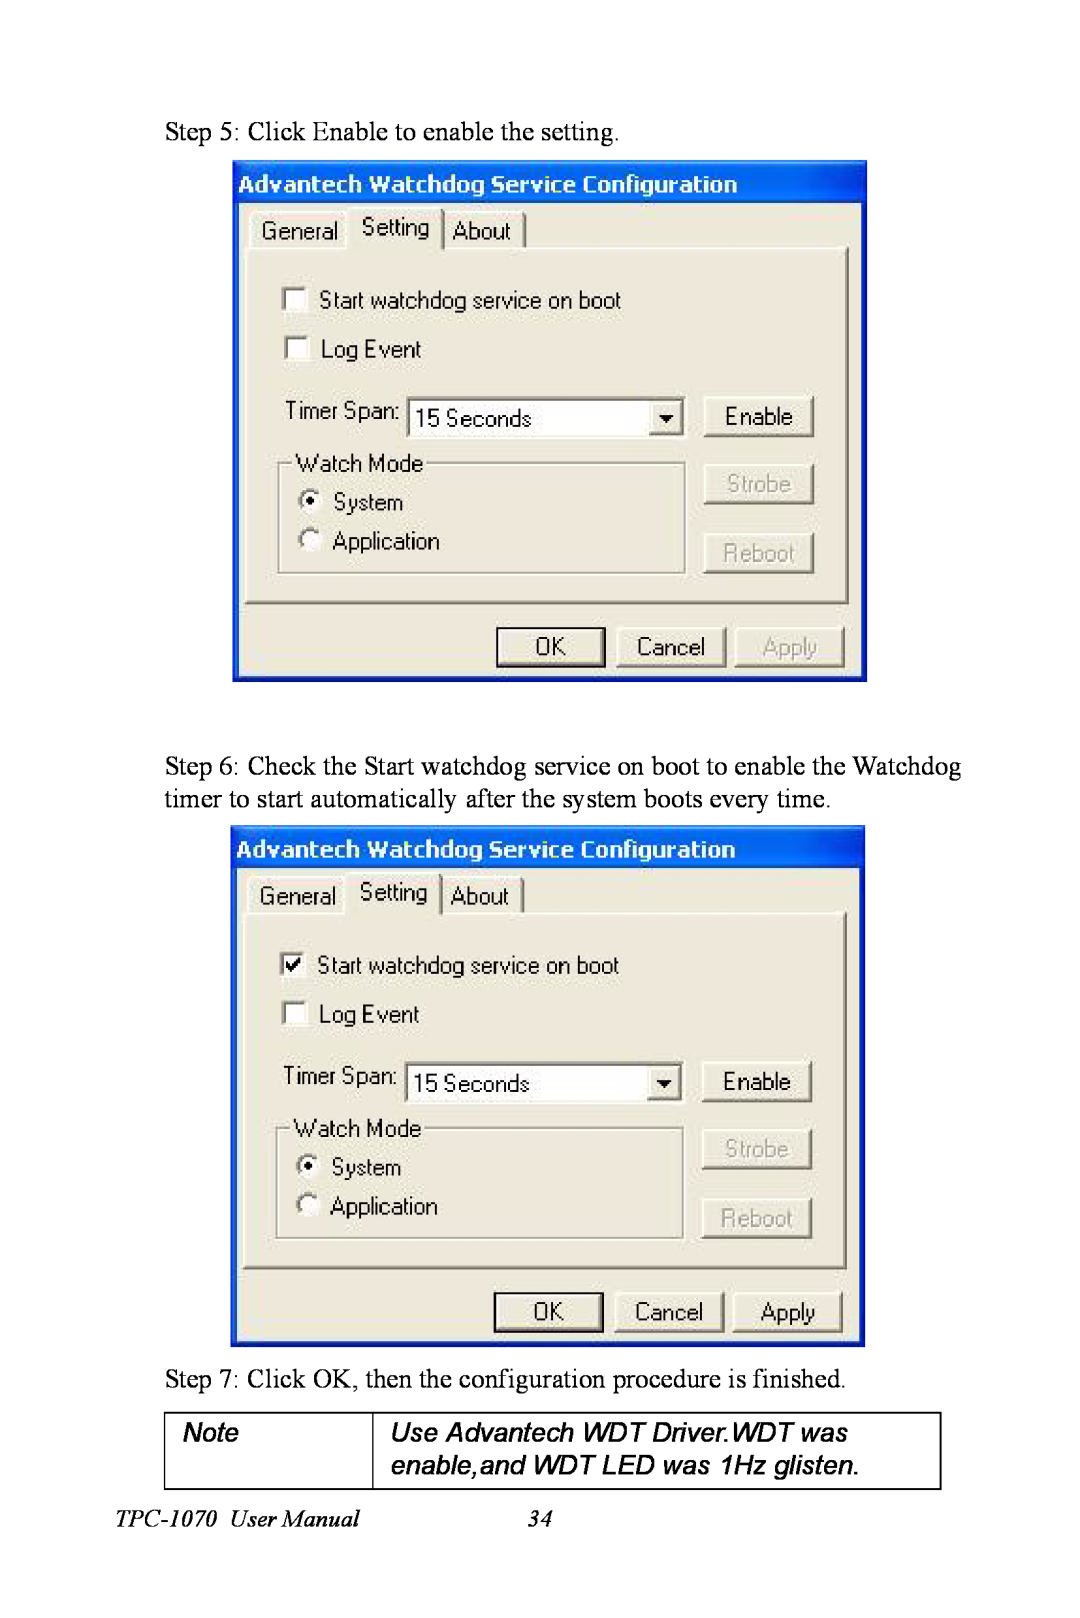 Intel TPC-1070 user manual Click Enable to enable the setting, Click OK, then the configuration procedure is finished 